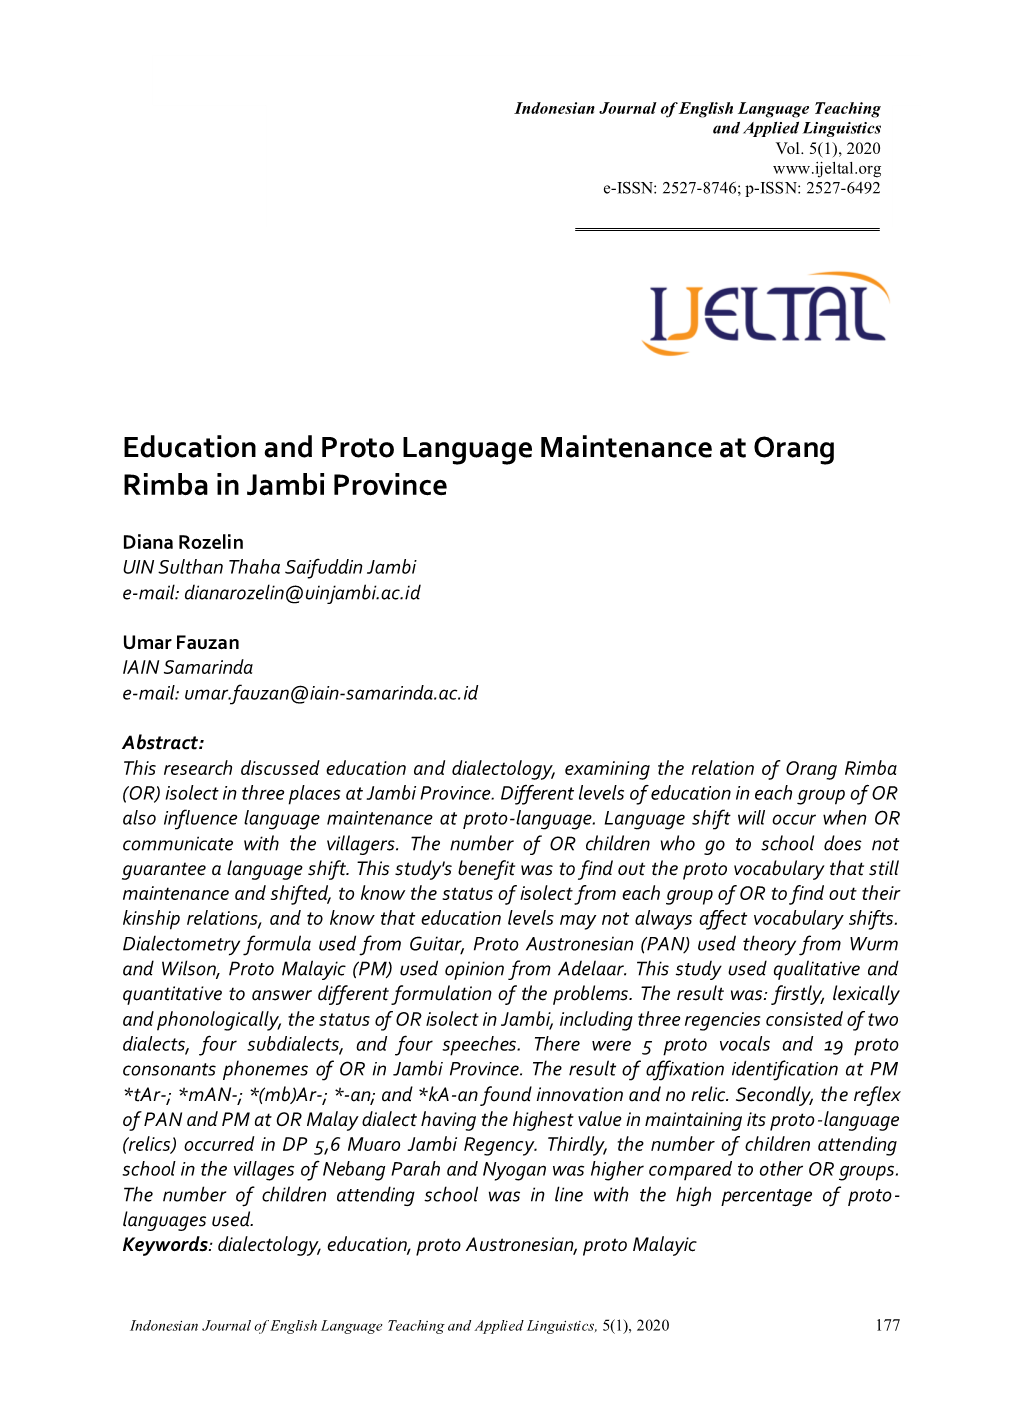 Education and Proto Language Maintenance at Orang Rimba in Jambi Province Indonesian Journal of English Language Teaching and Applied Linguistics Vol